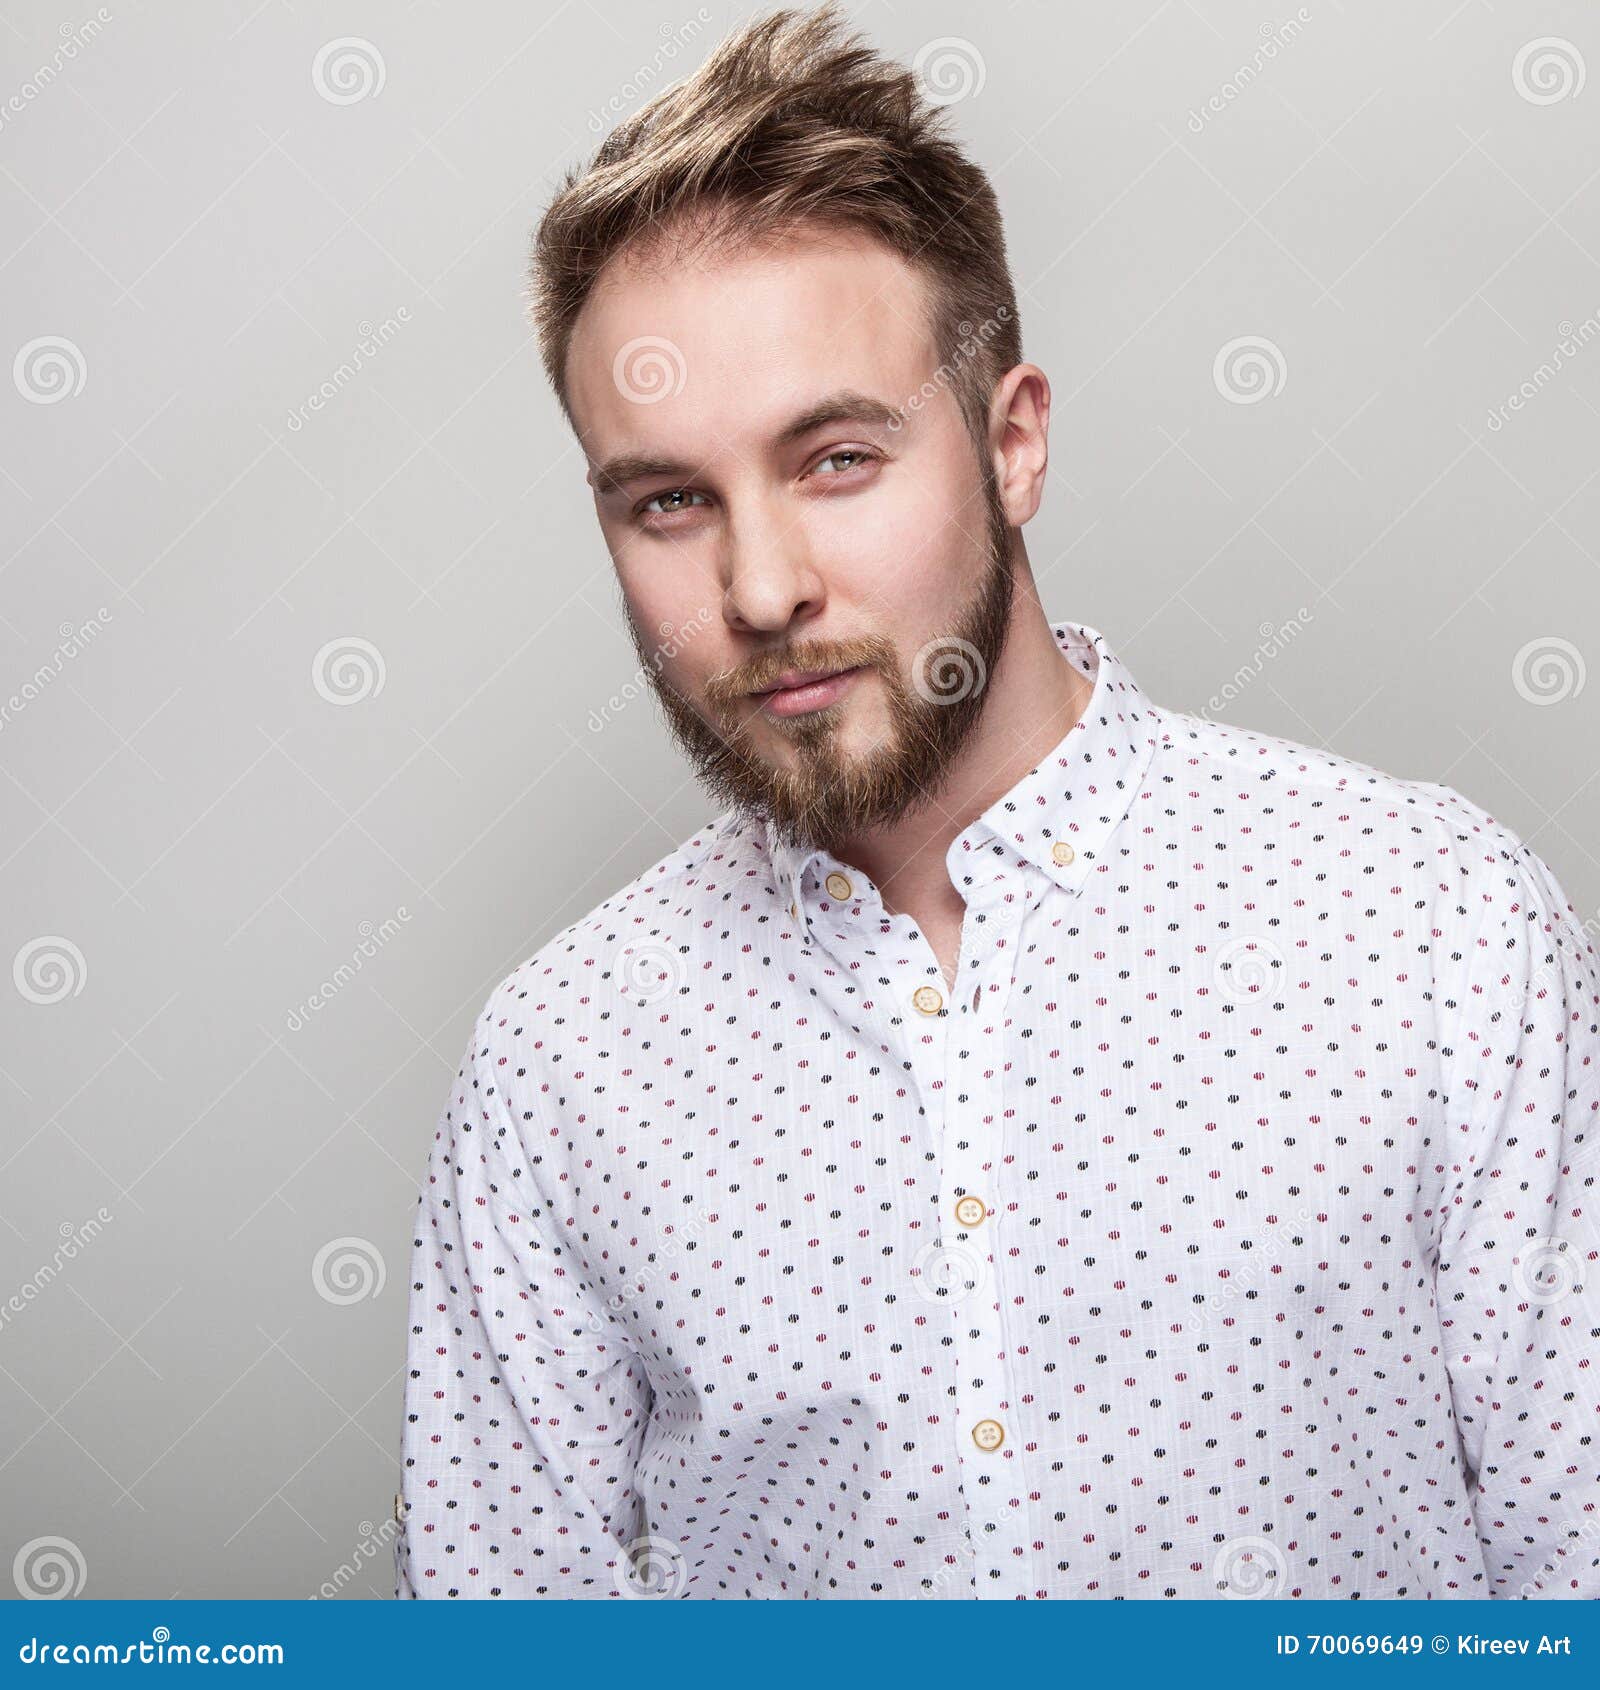 Portrait of Young Handsome Positive Man in White Shirt with an Amusing ...